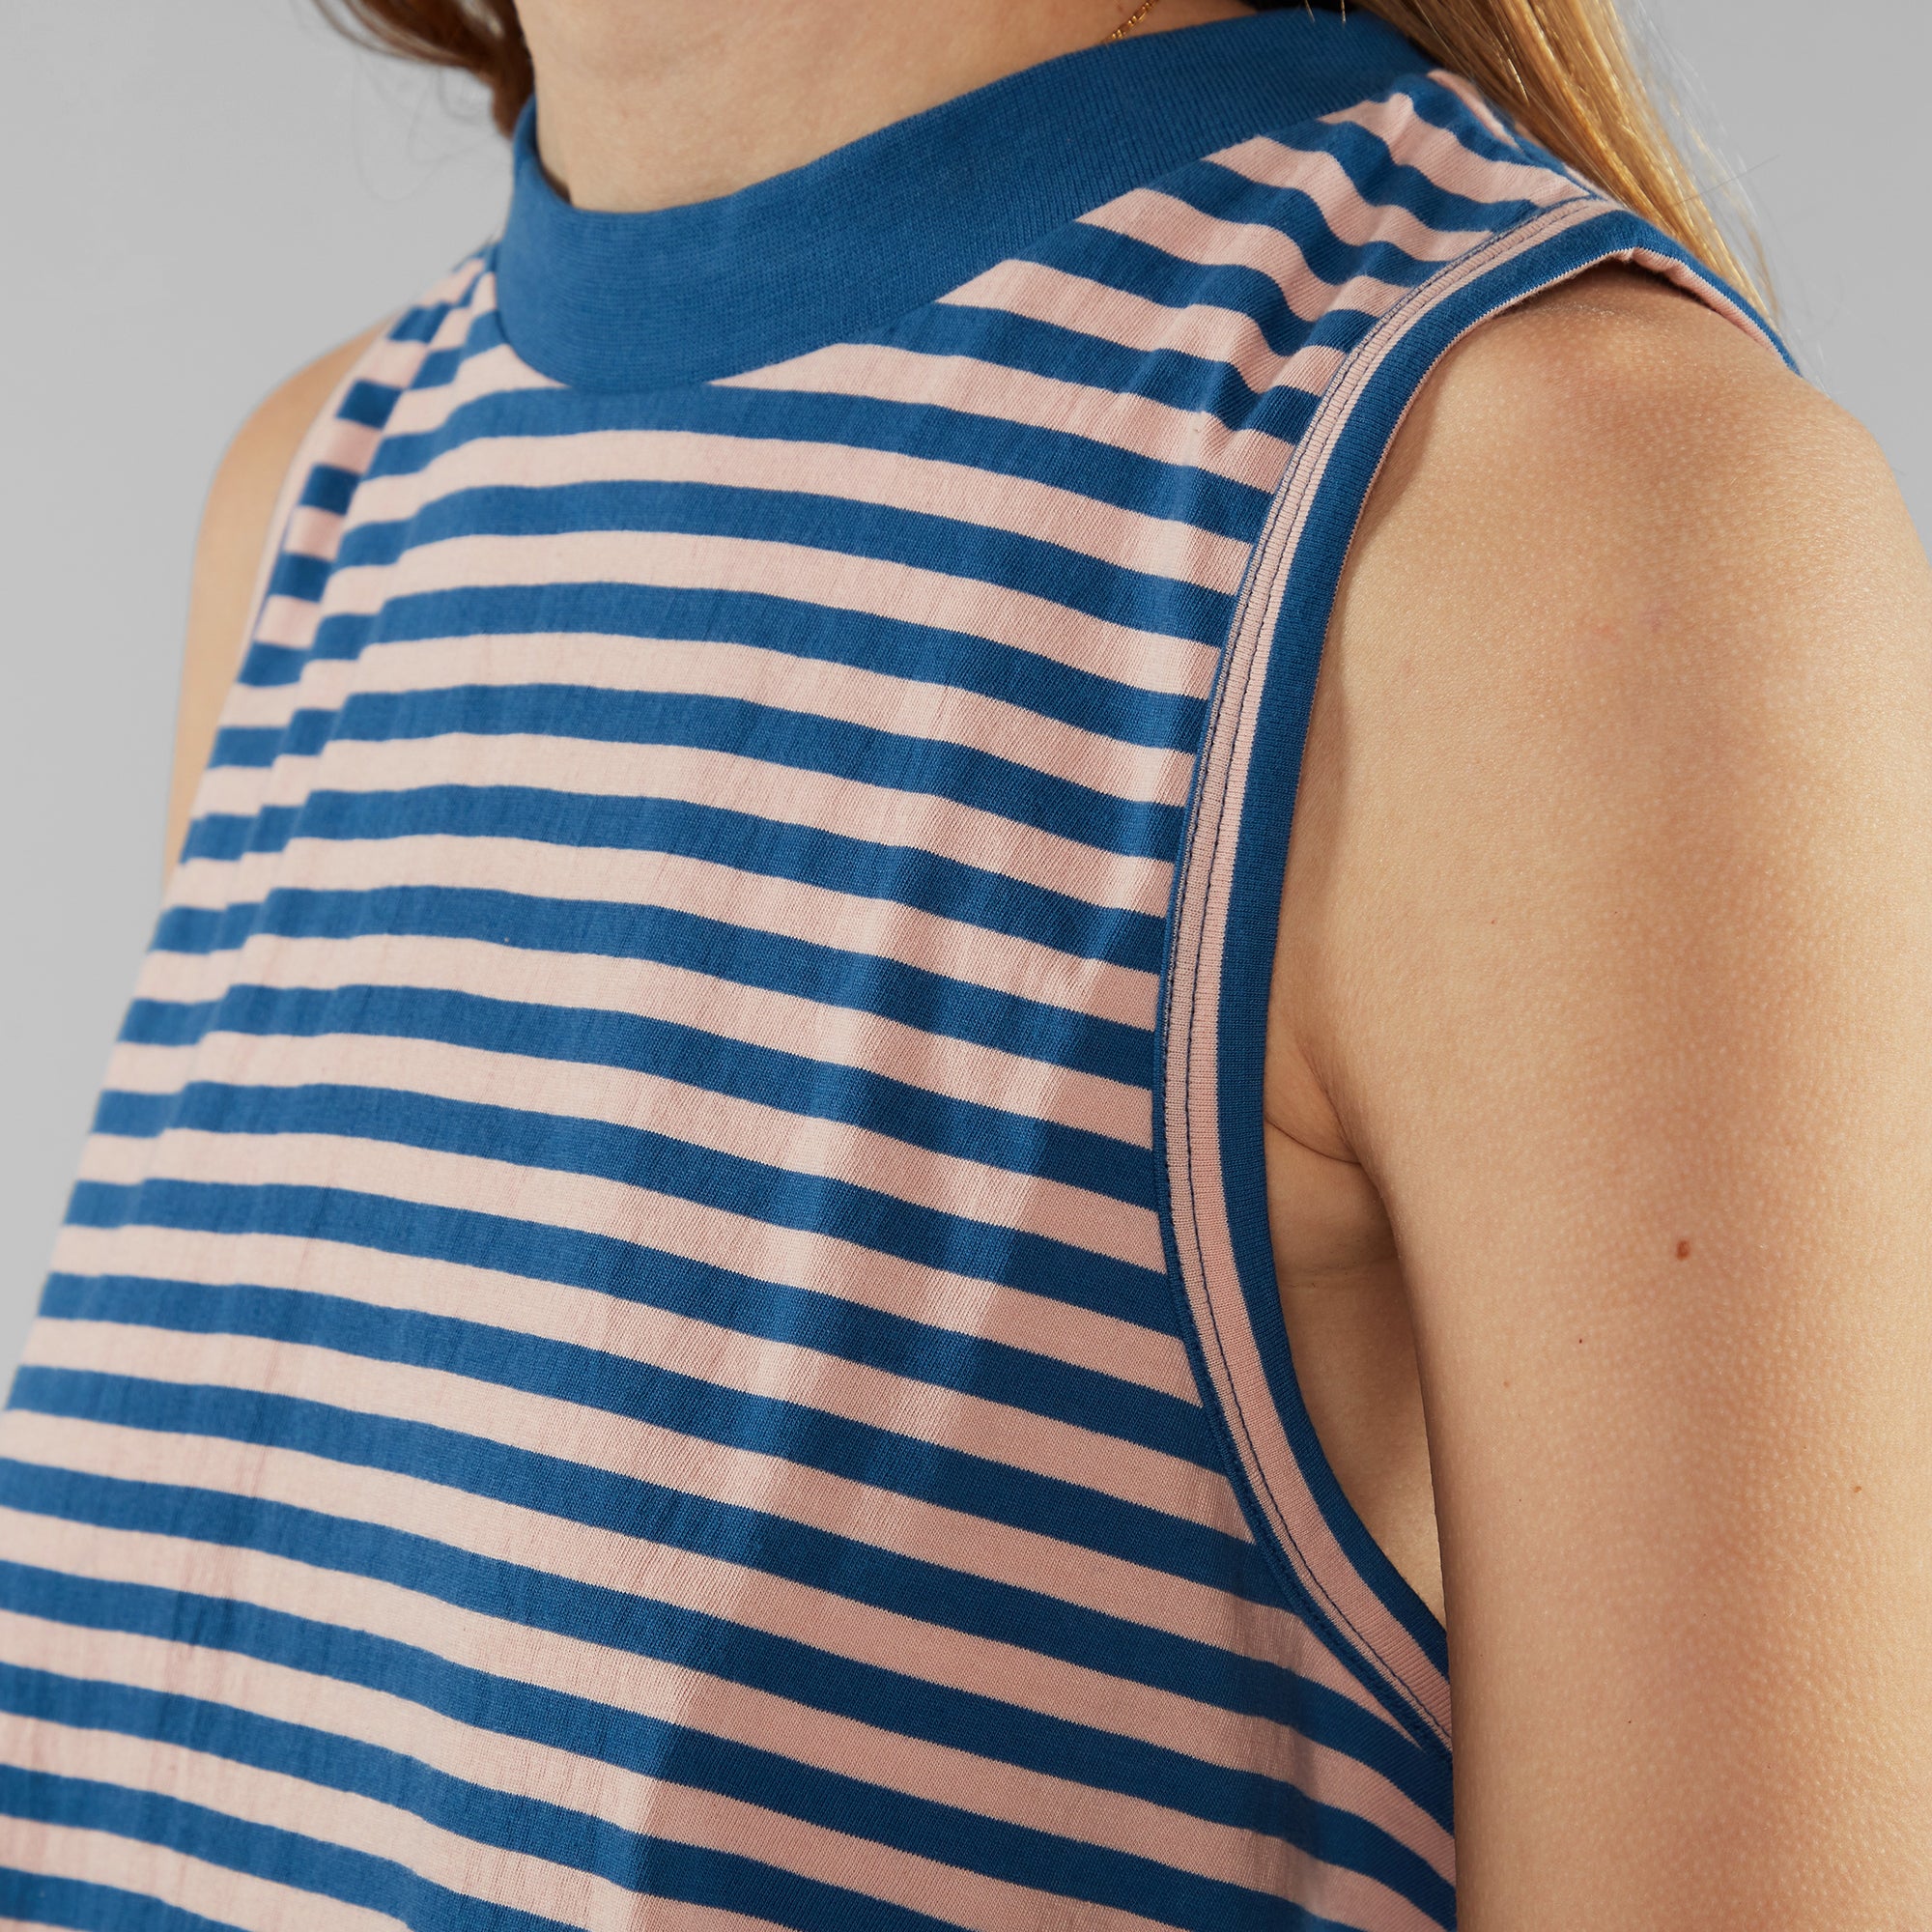 Striped top made of organic cotton